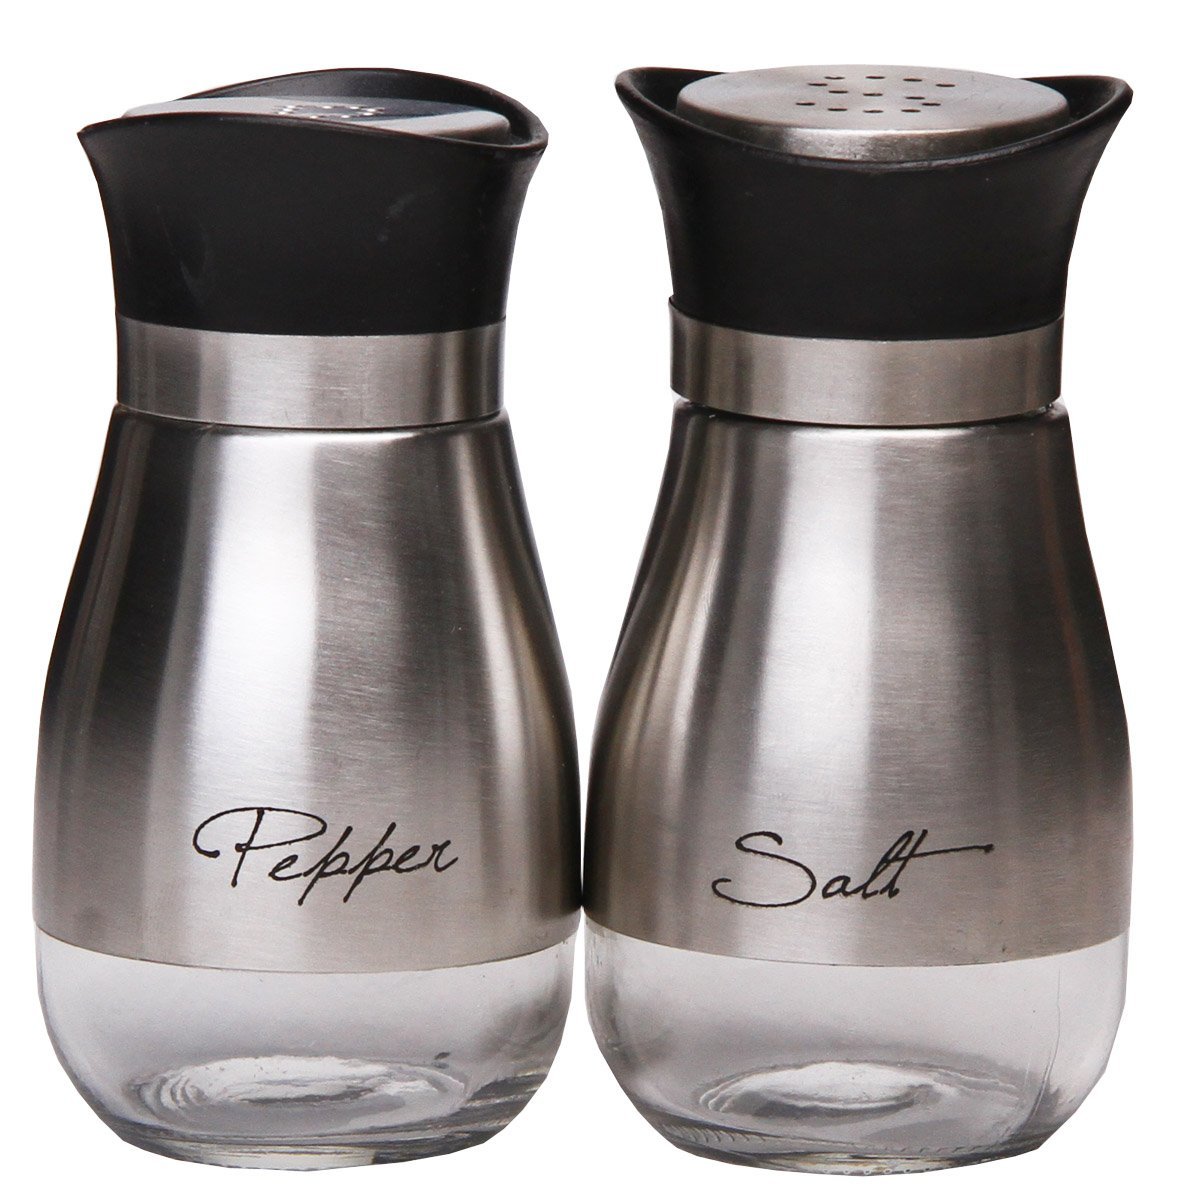 Salt And Pepper Shakers: Which Is Which?